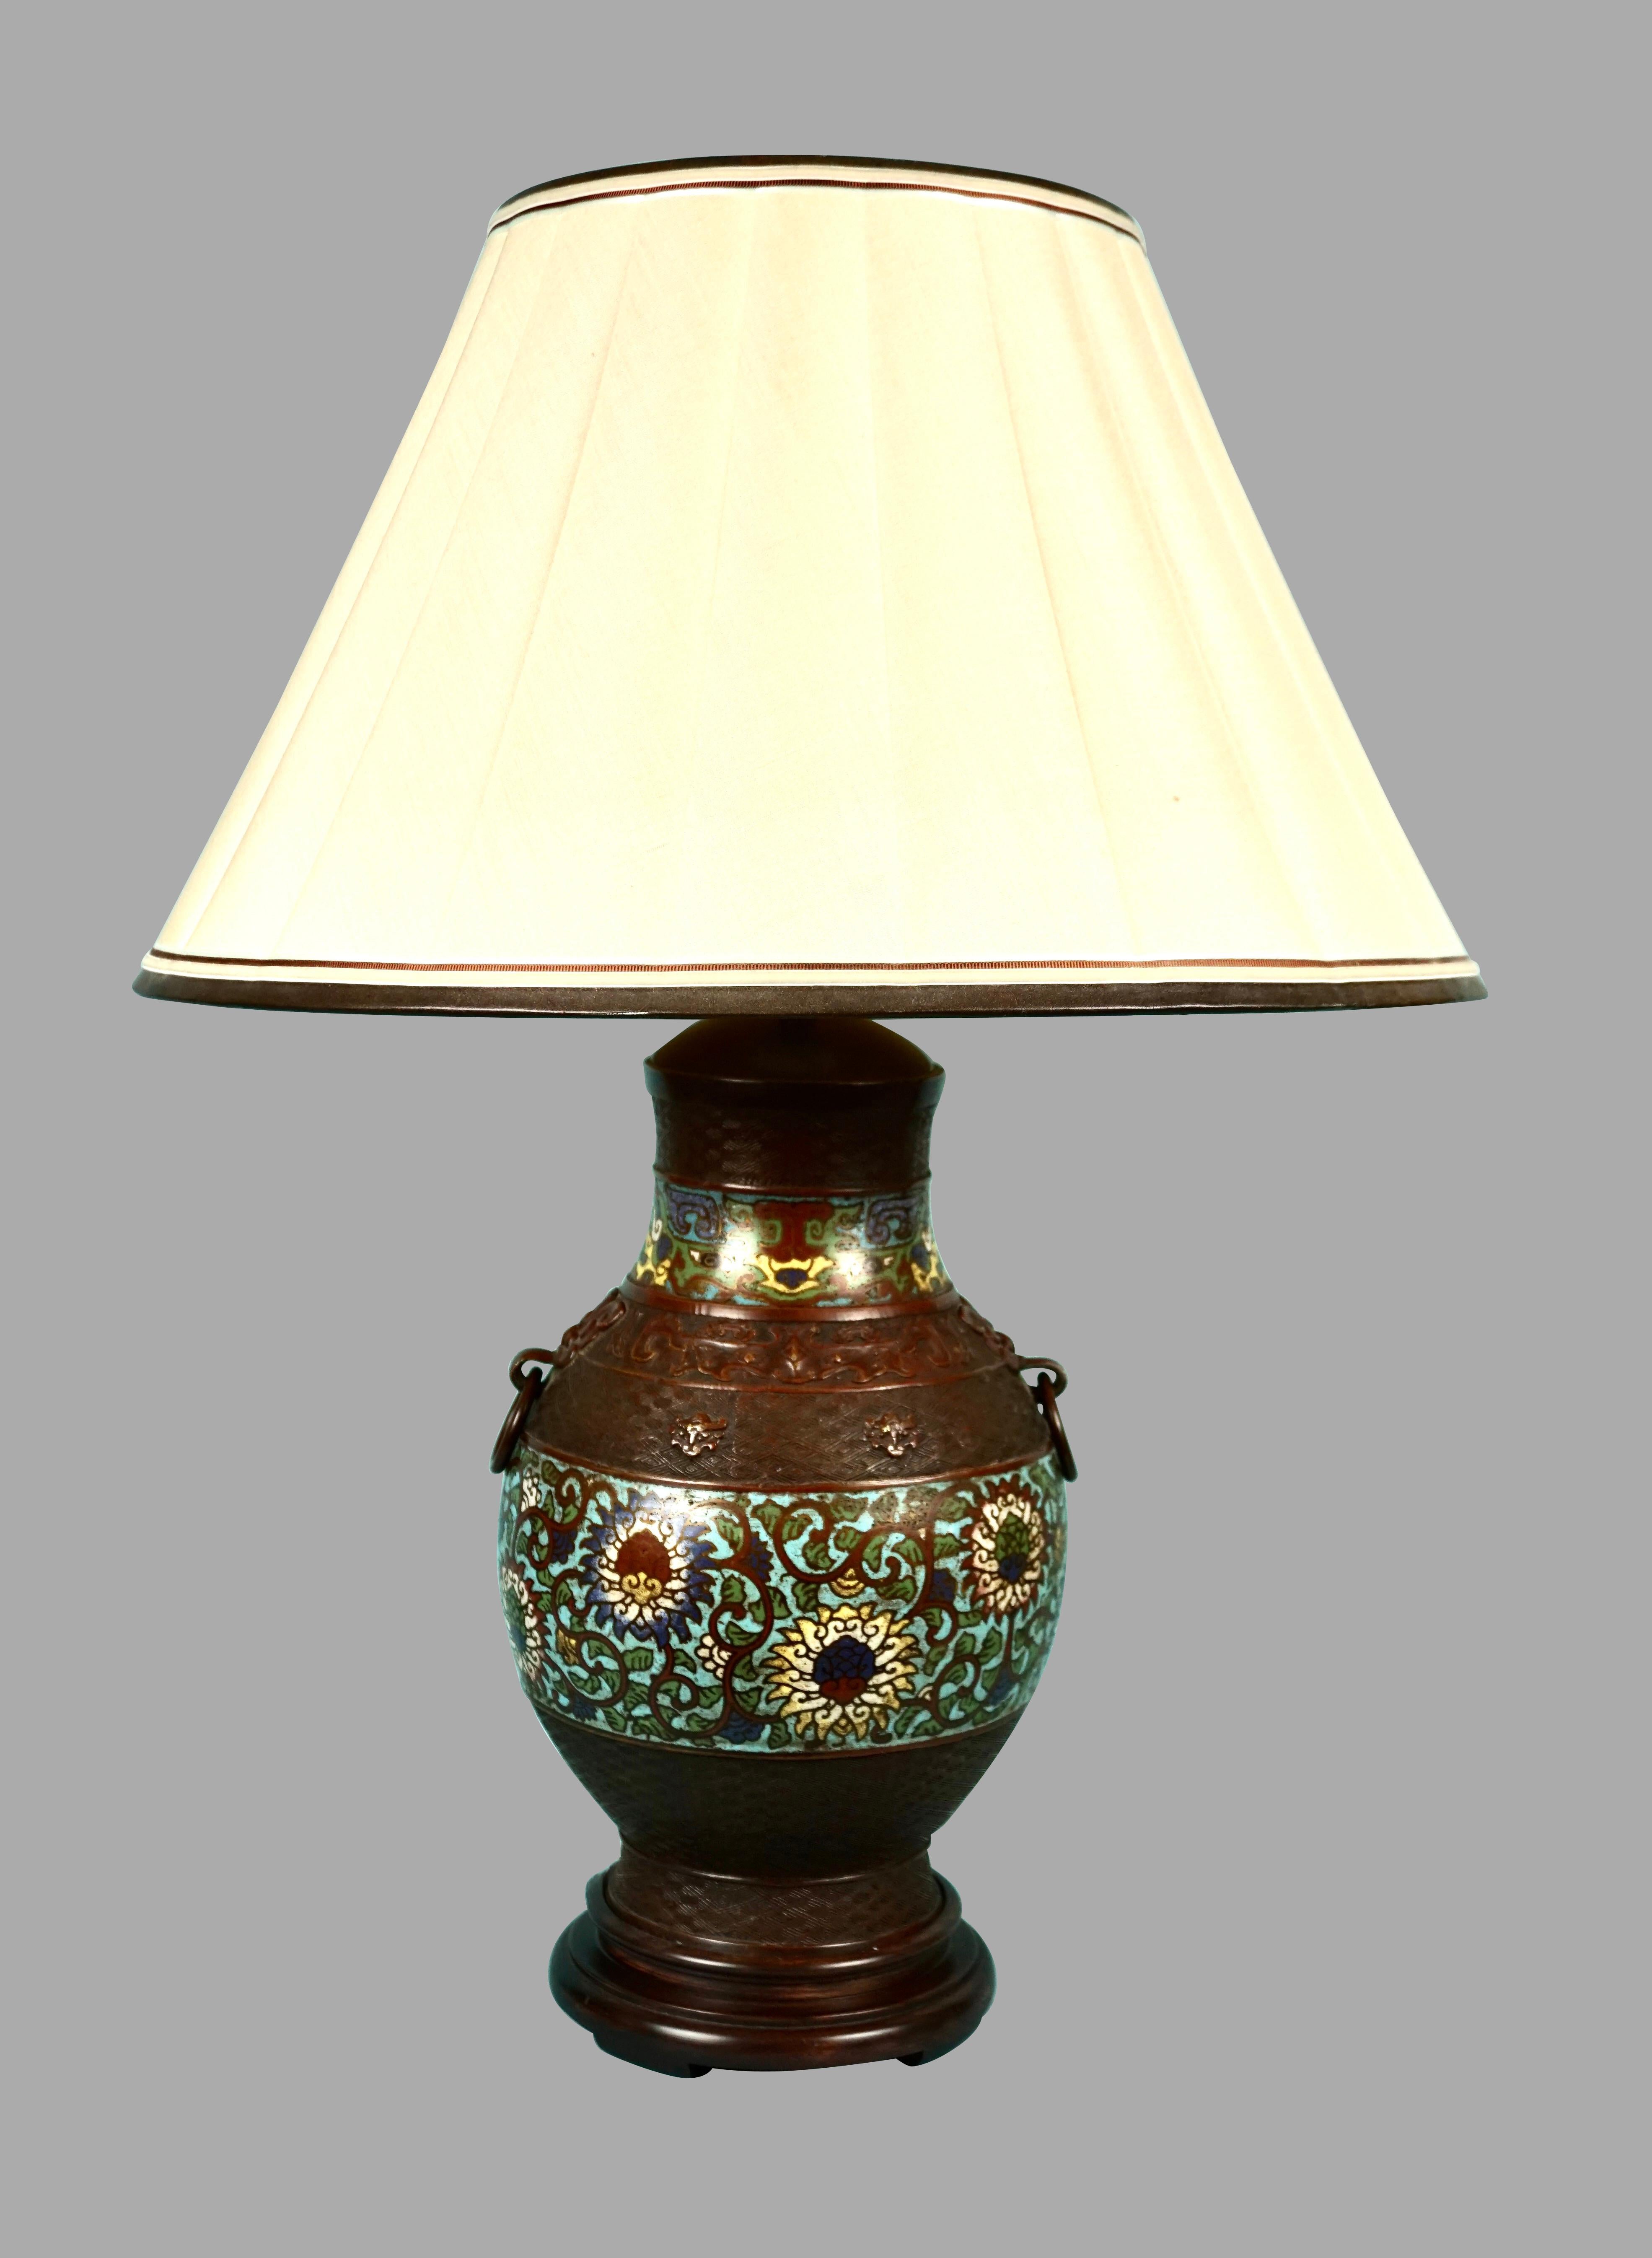 A bronze Japanese champleve vase of baluster form with ring handles and foliate decoration in shades of oxblood, robin's egg blue, ochre, white and forest green.
The vase depicts stylized chrysanthemums, the Japanese national flower symbolizing